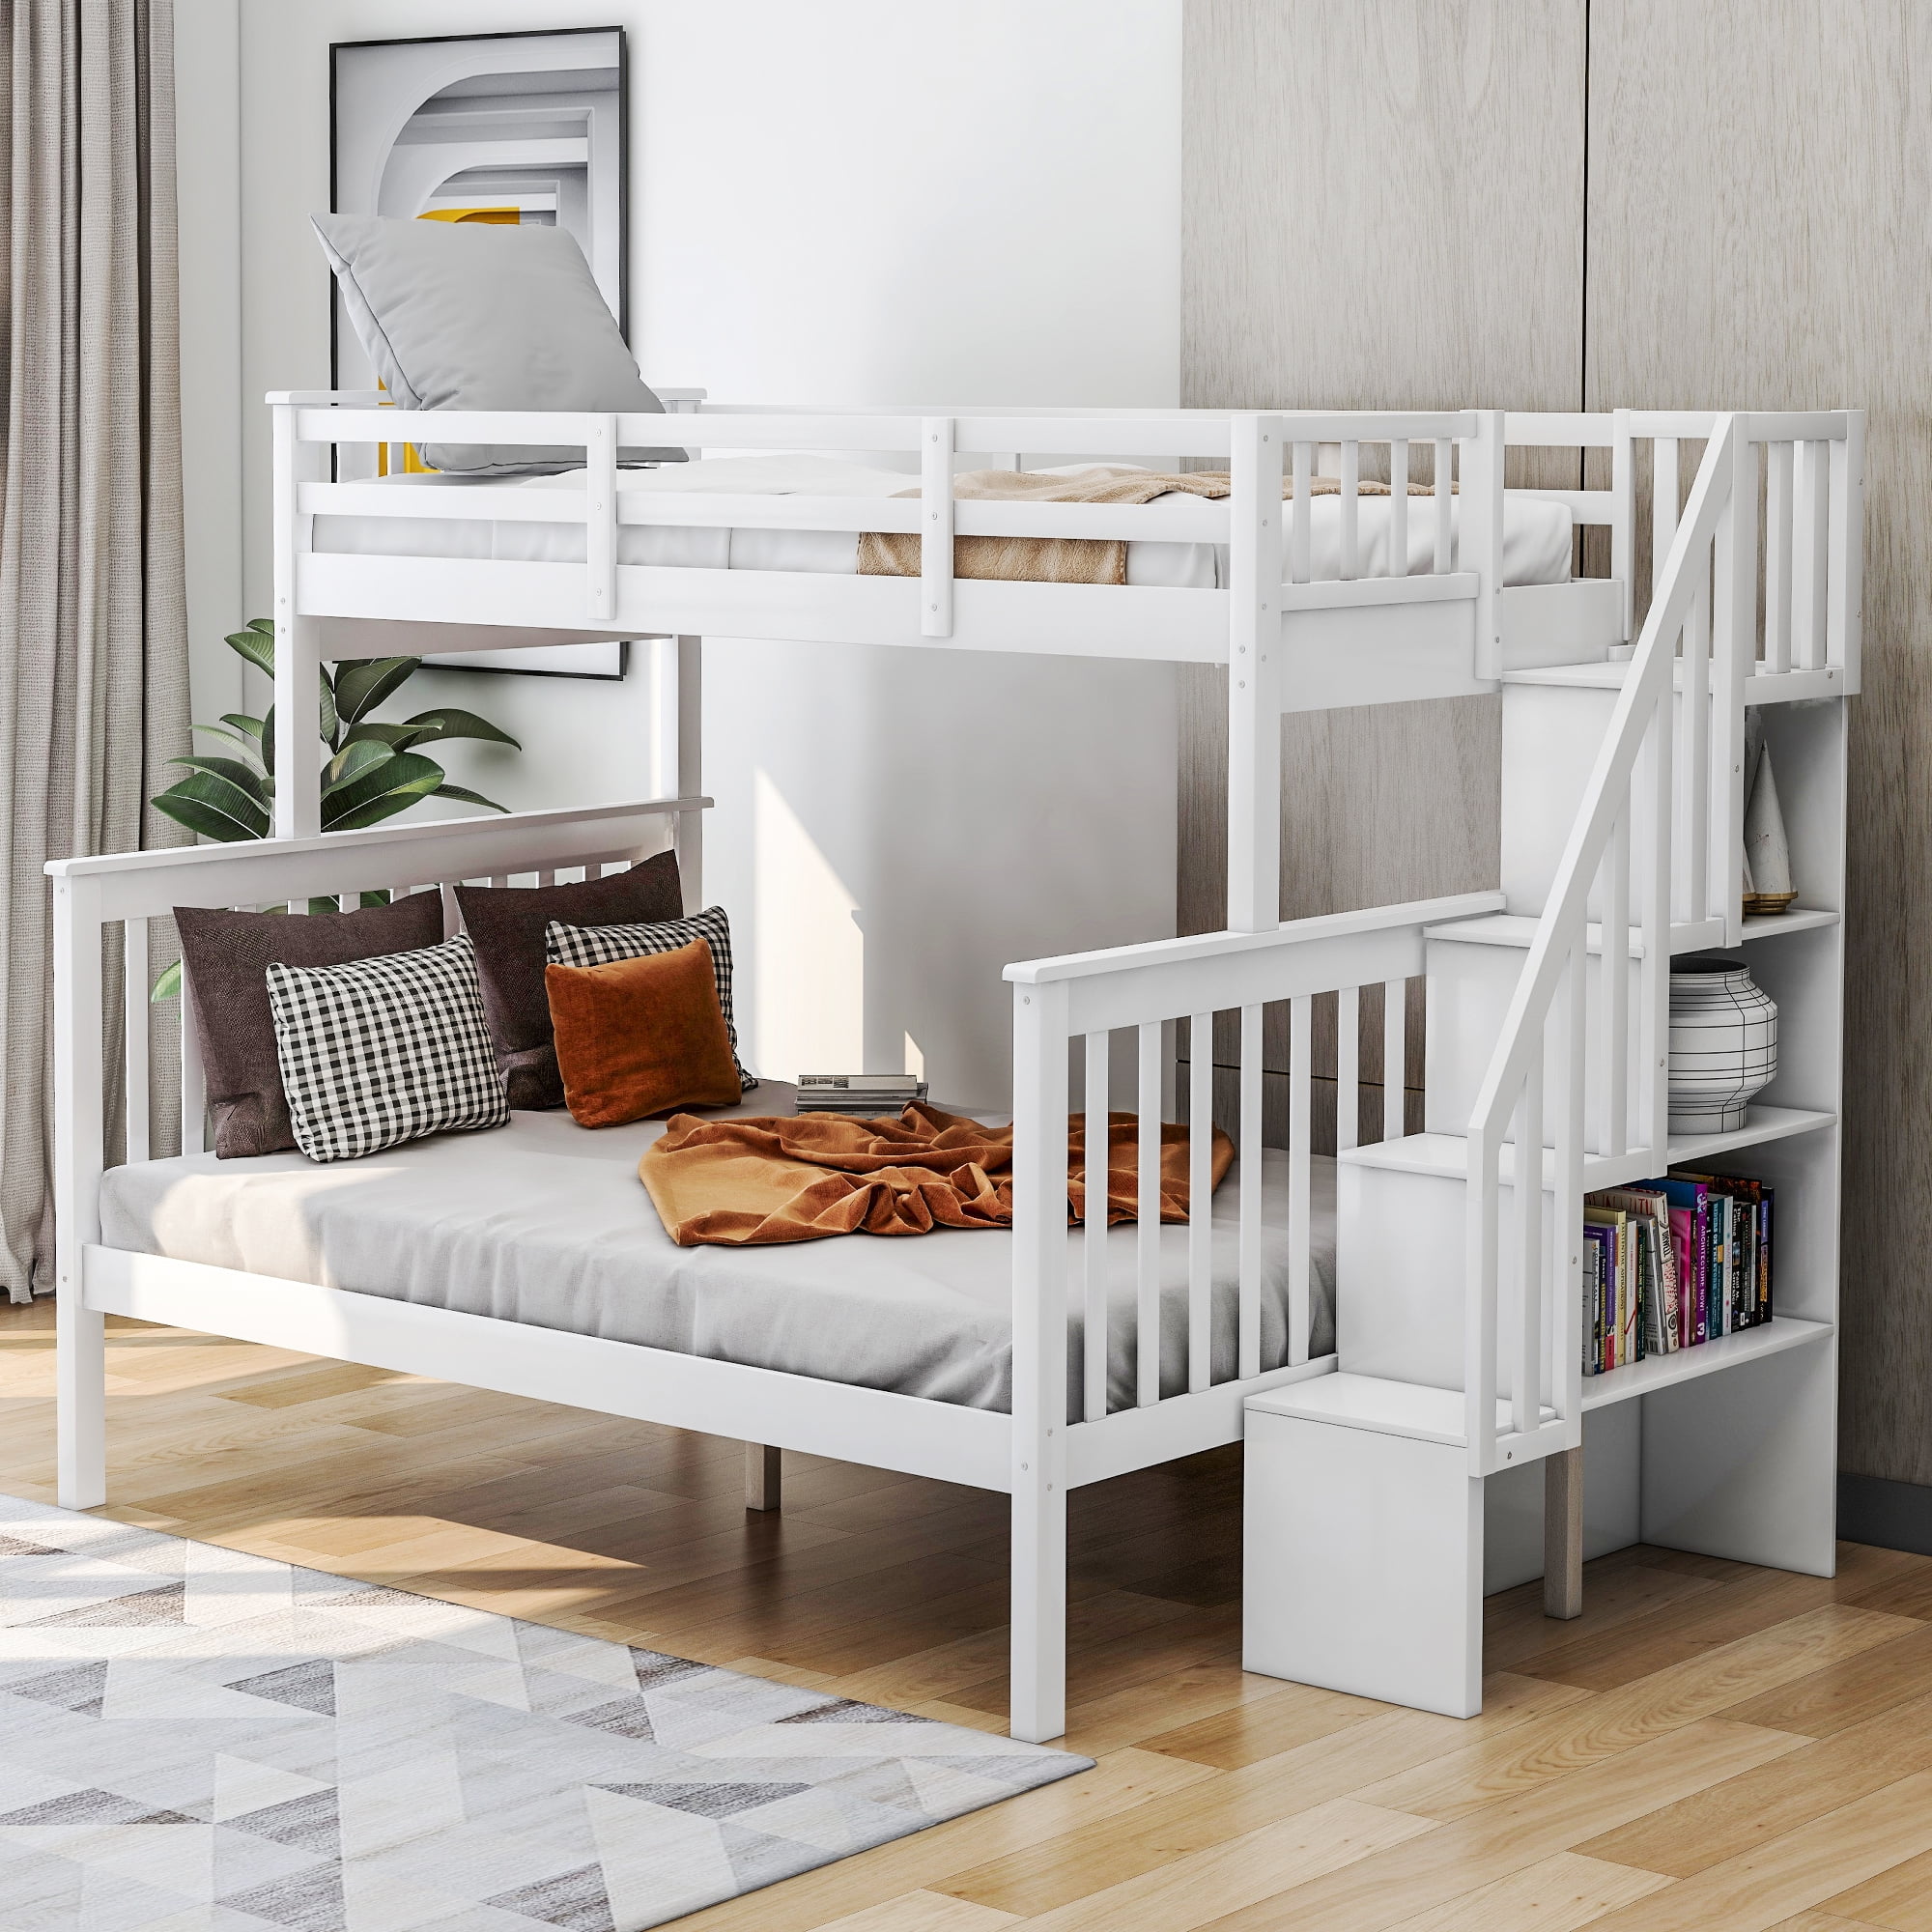 Twin Over Full Bunk Bed Frame Hardwood, Are Bunk Beds Safe